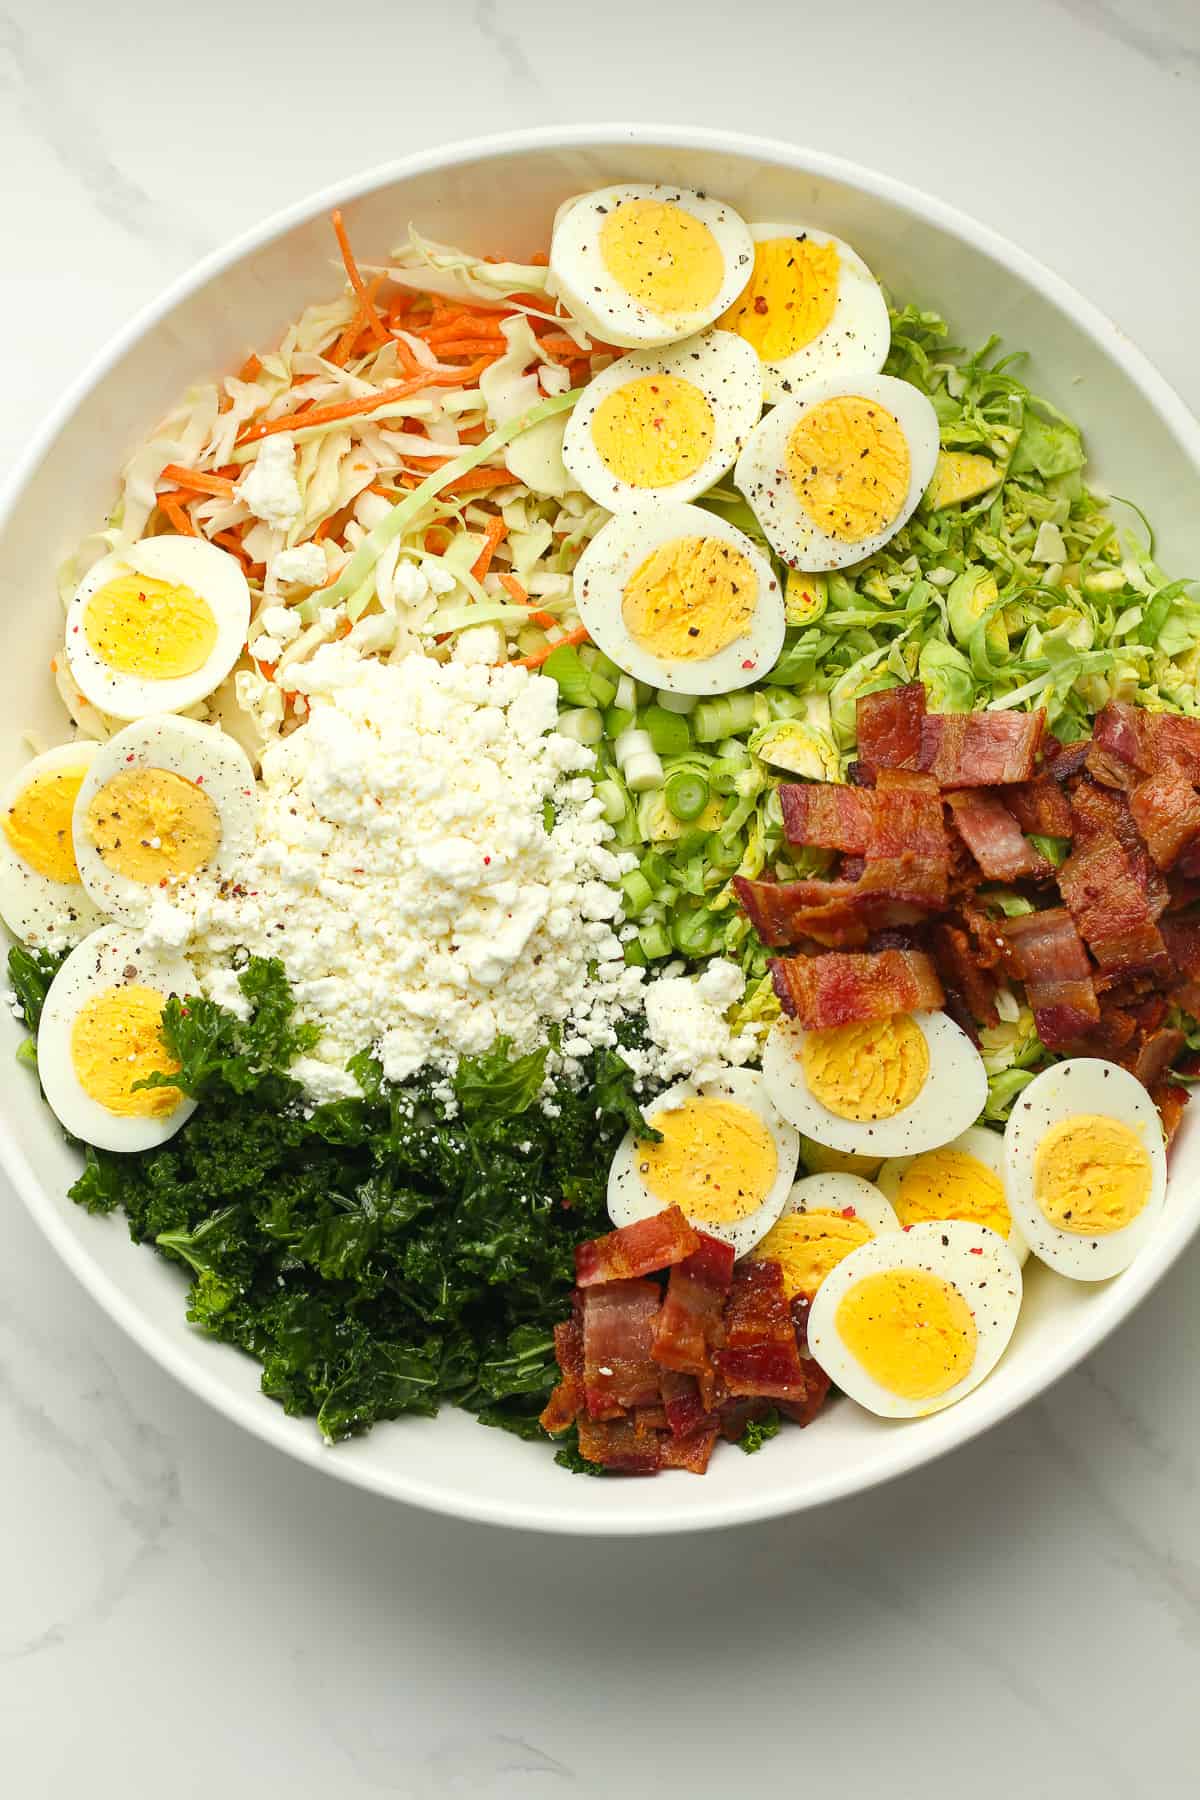 A large bowl of the salad with the eggs, bacon, and goat cheese on top.